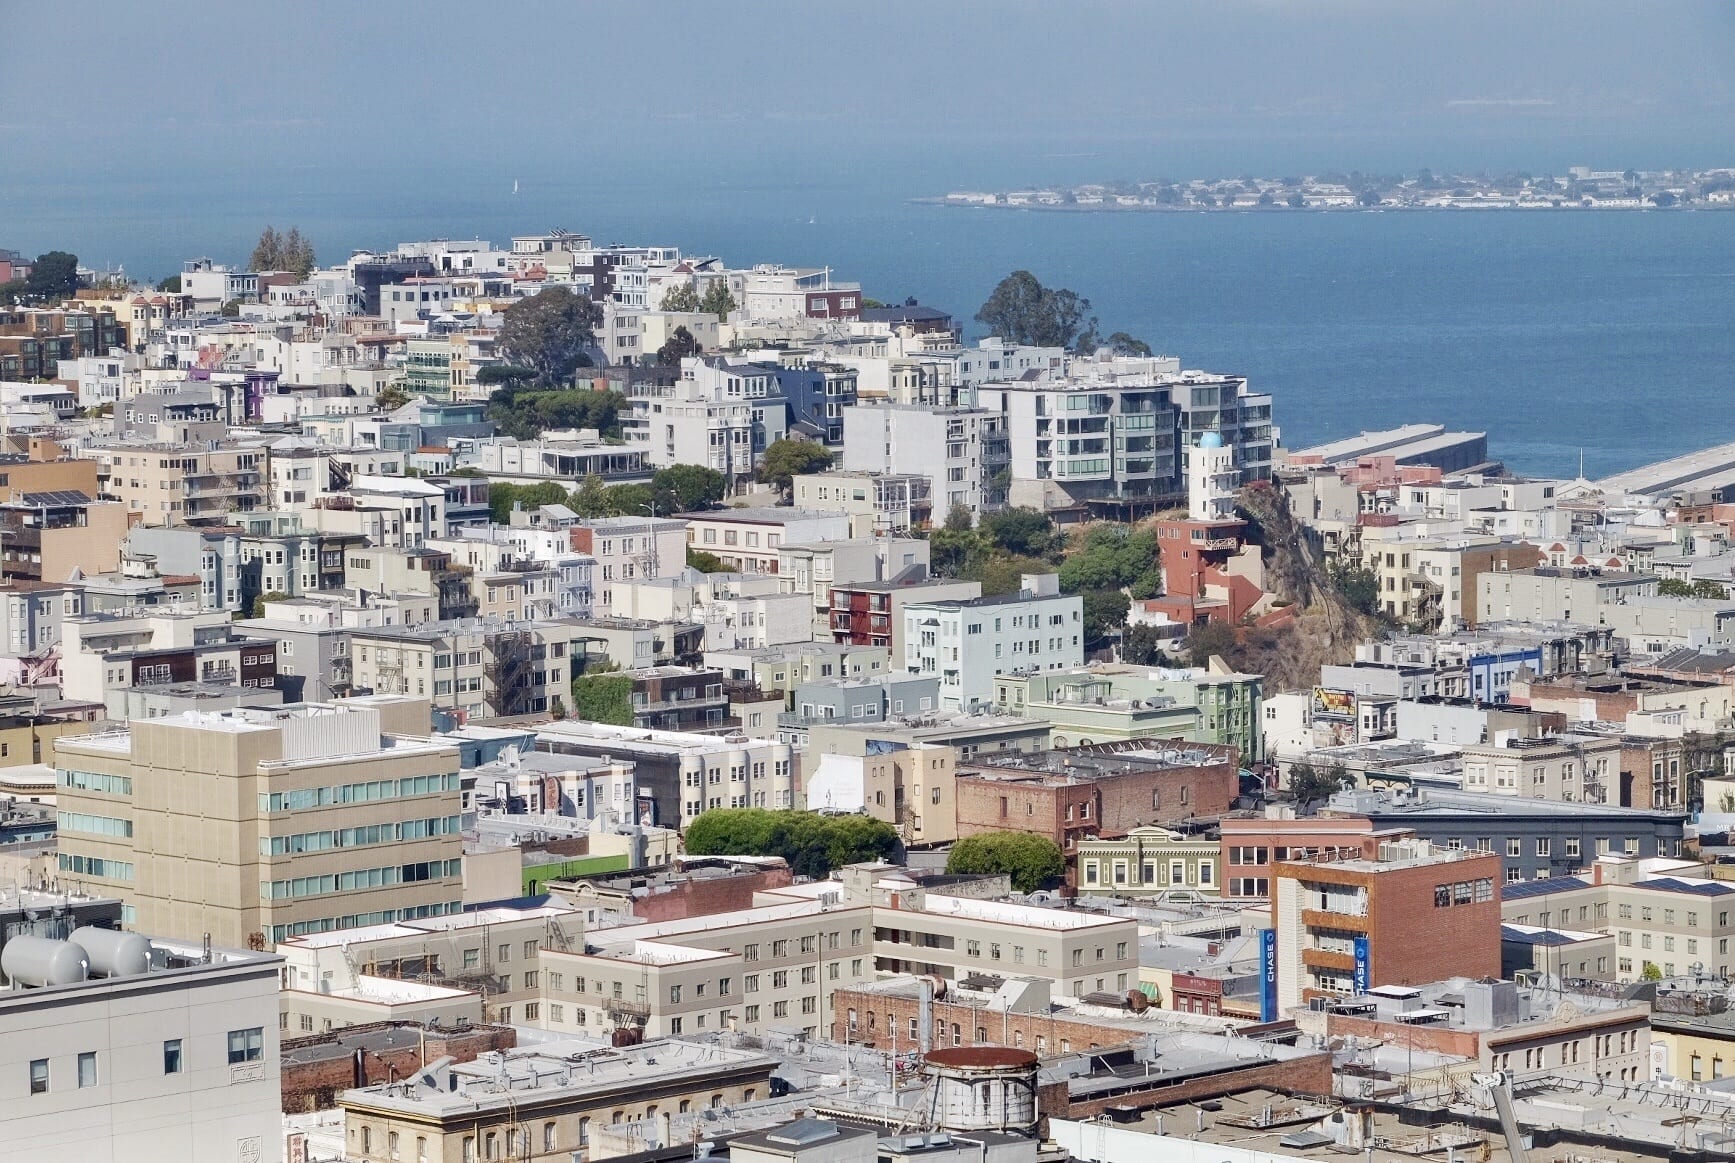 The San Francisco neighborhoods of Russian Hill and North Beach have square-shaped buildings stacked on top of each other, ascending and descending down the hills with occasional trees. In the background is San Francisco Bay and you can see Oakland through the haze in the distance.